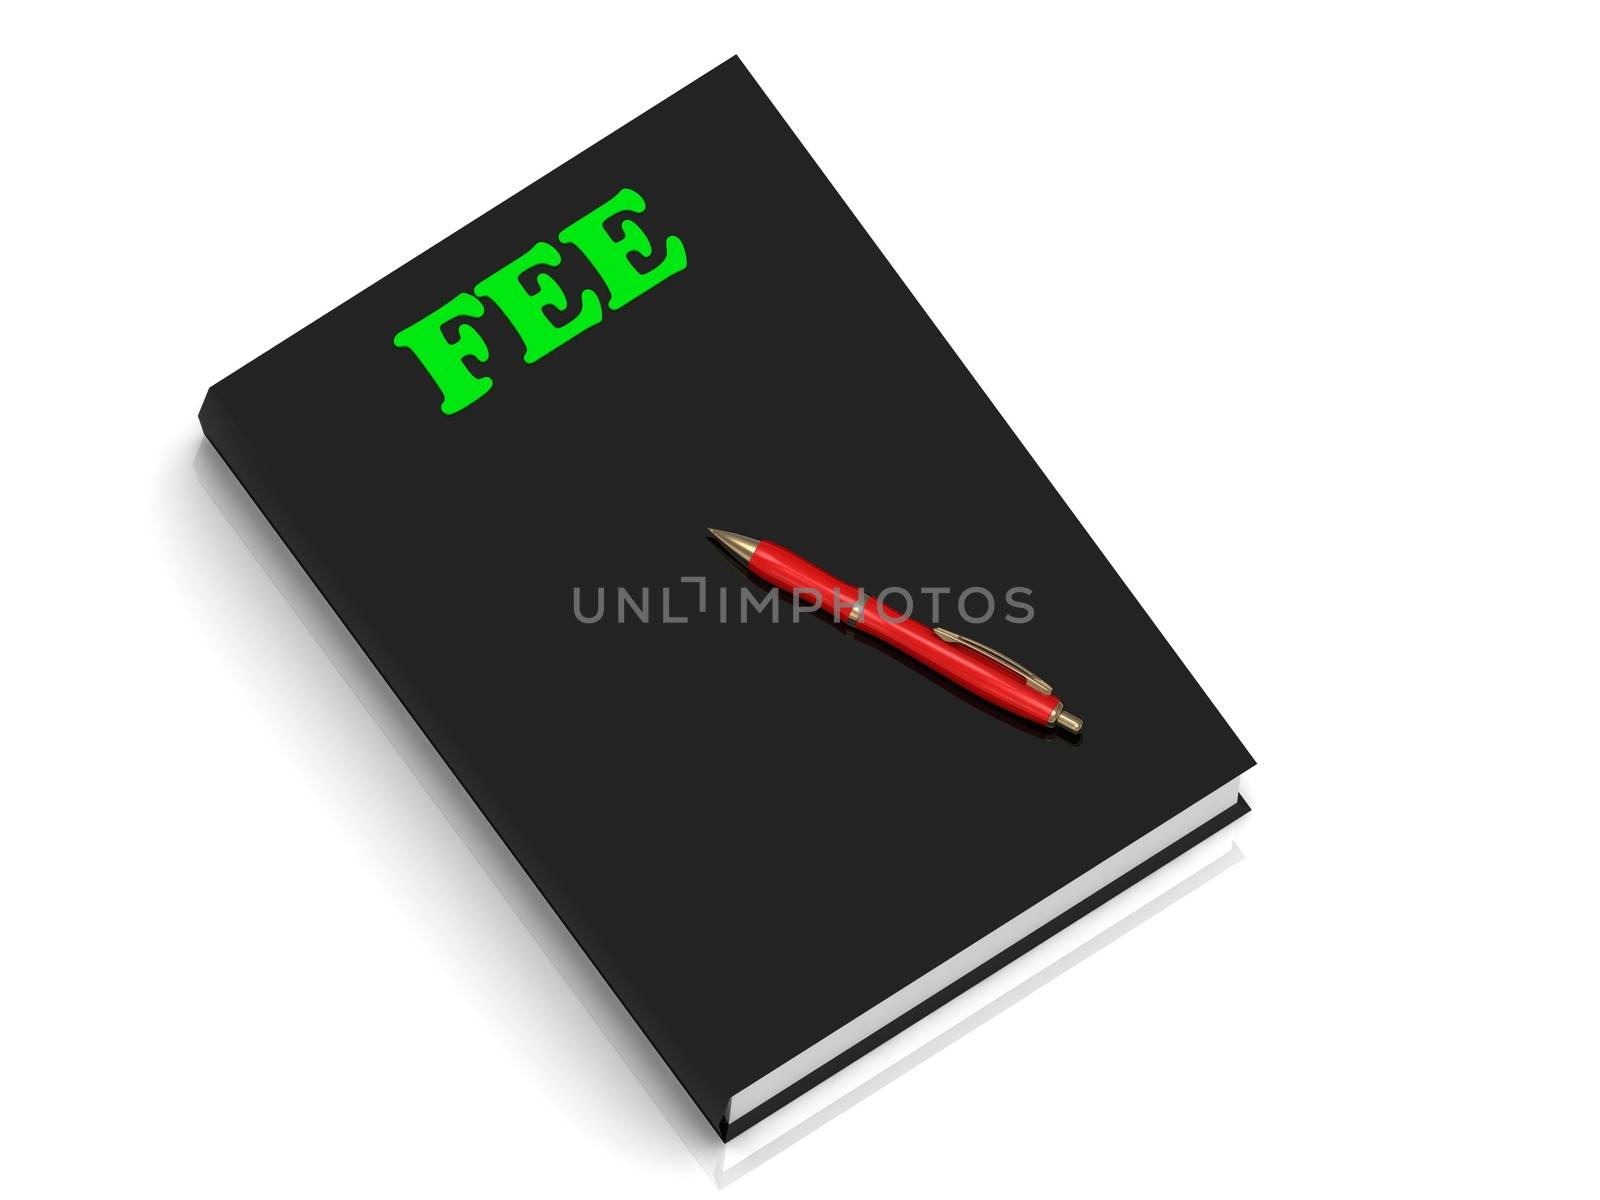 FEE- inscription of green letters on black book on white background